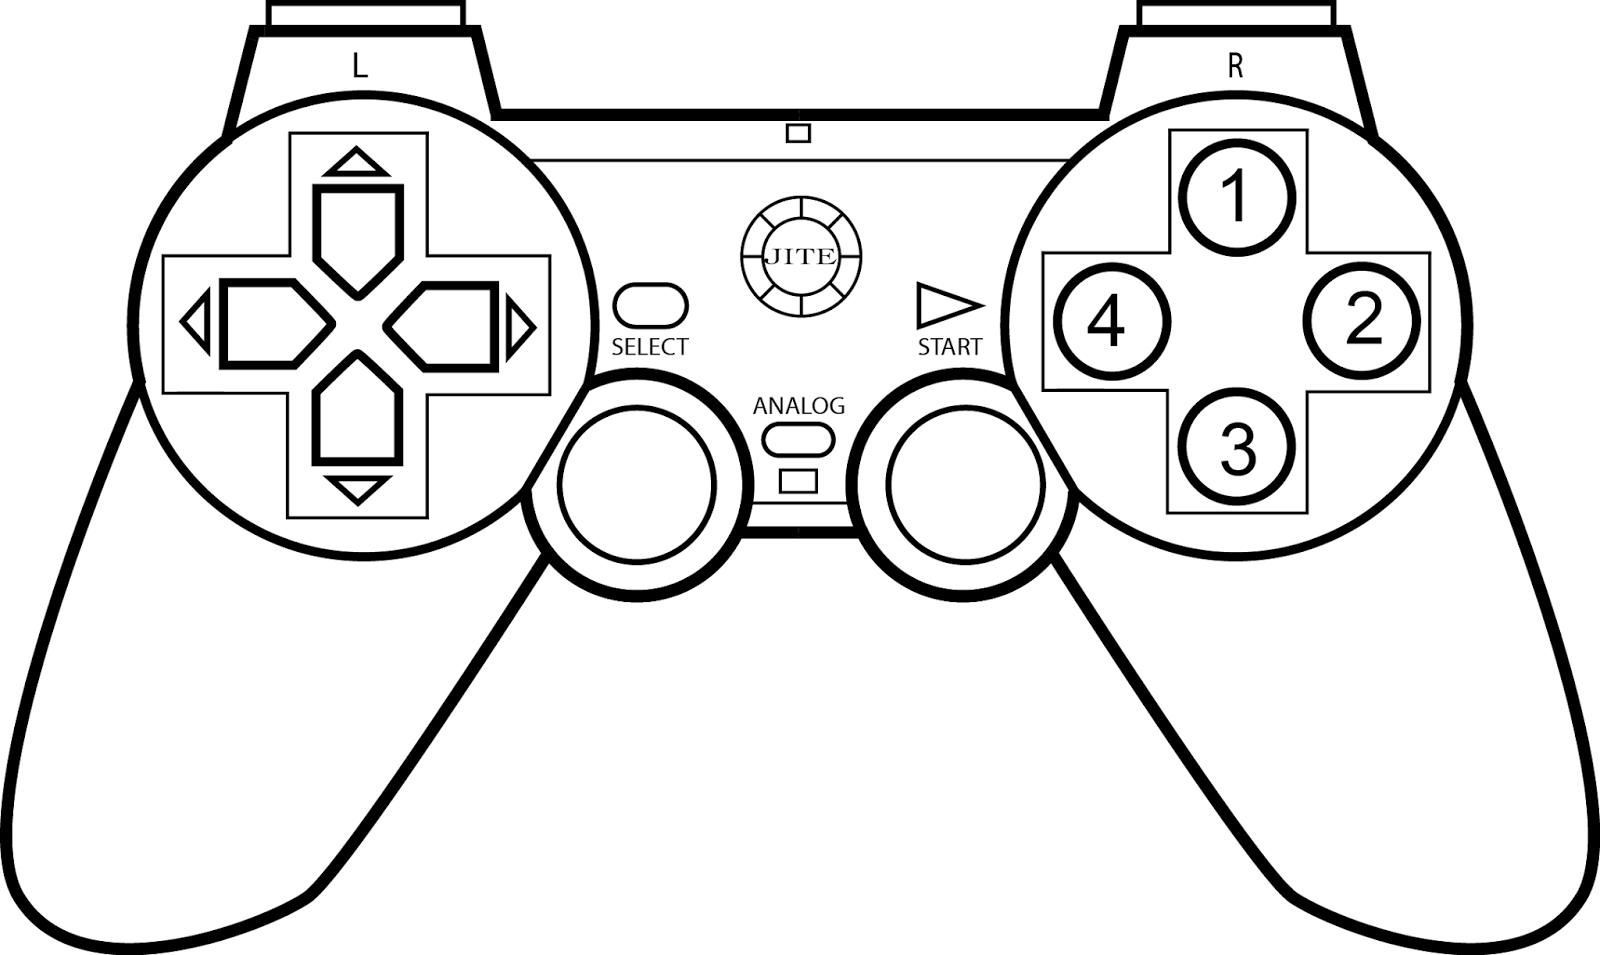 Xbox Coloring Pages at GetDrawings | Free download